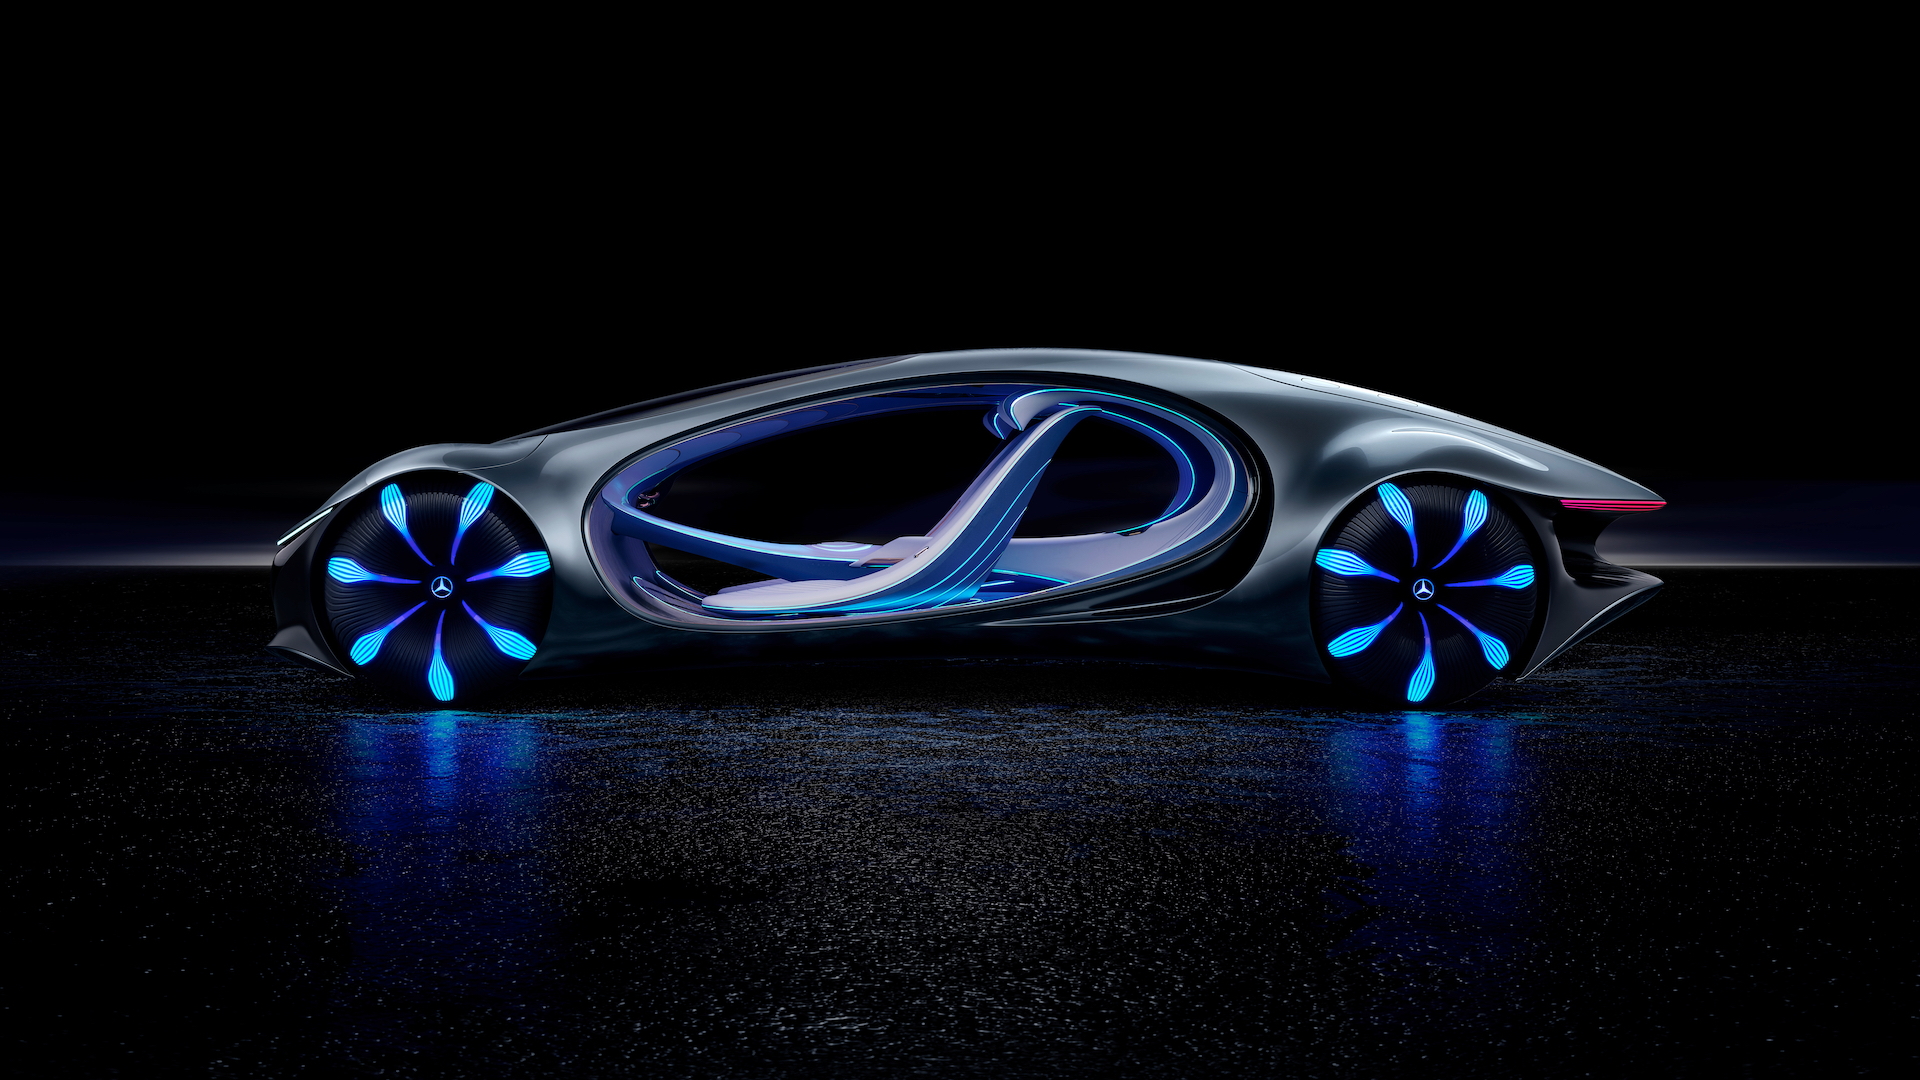 CES: Mercedes Benz Avatar Concept Looks Ahead To More Environmentally Responsible Batteries